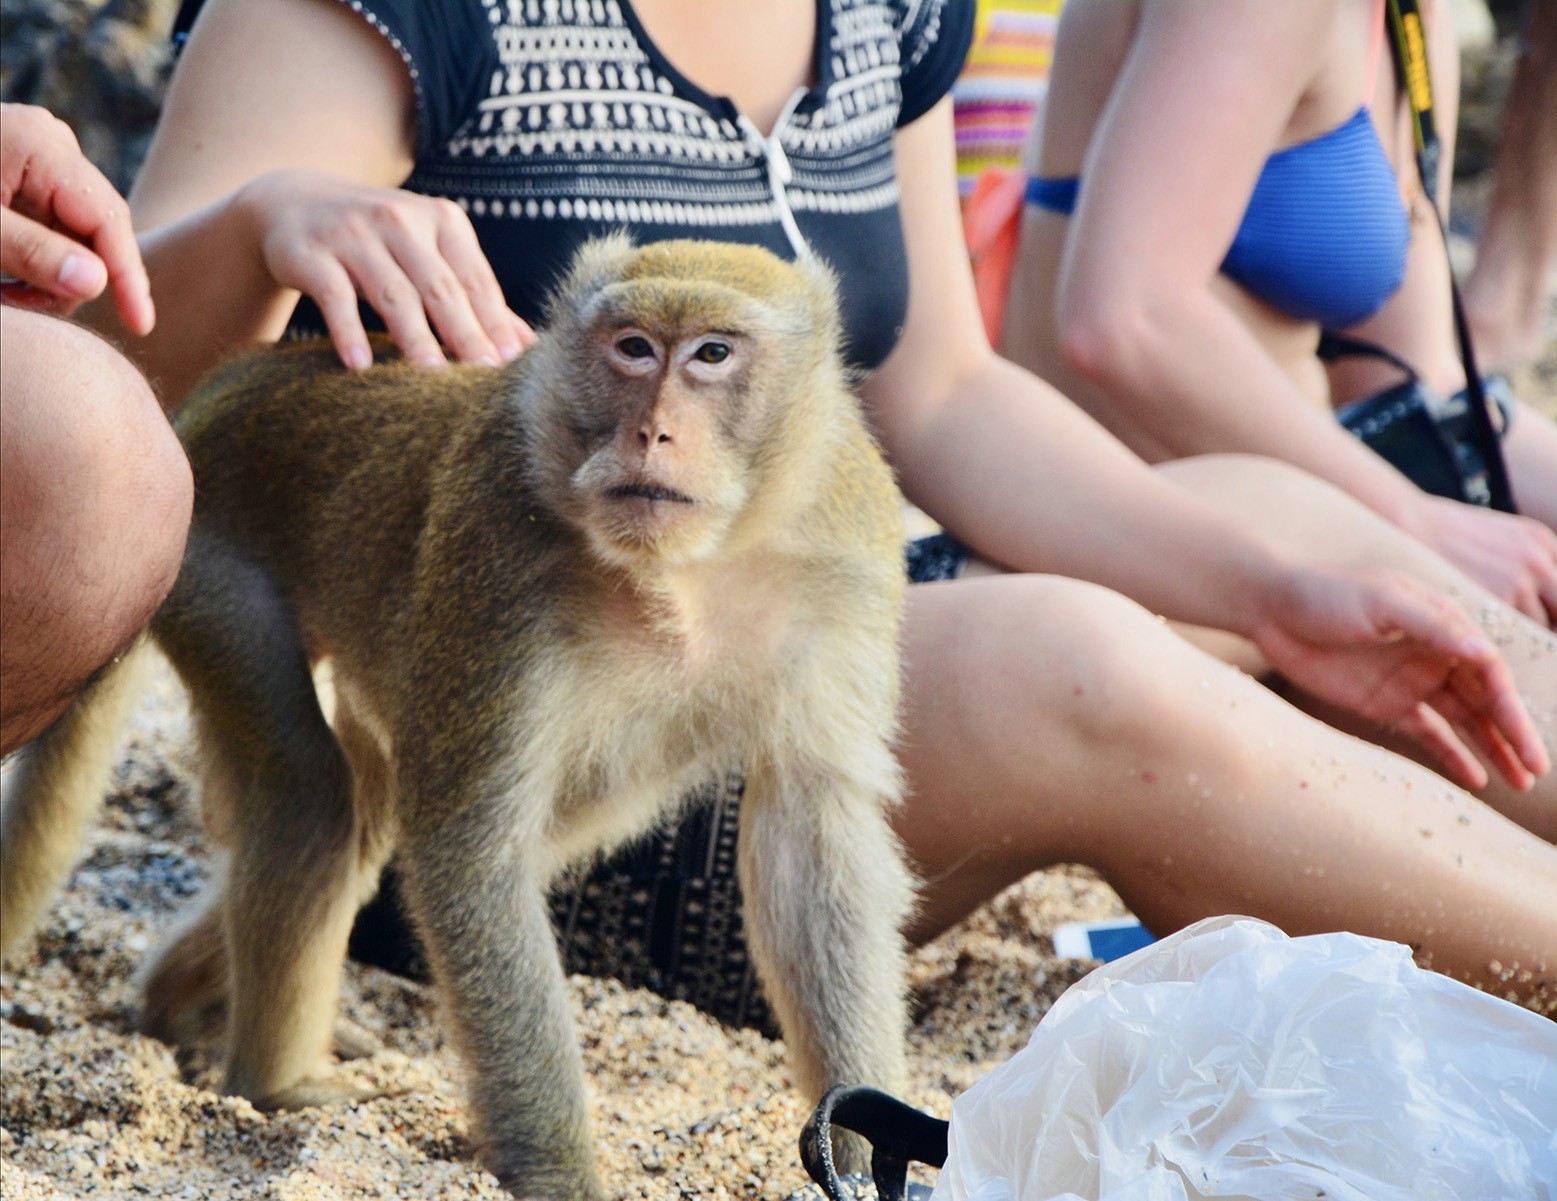 Monkey petted by people on the beach